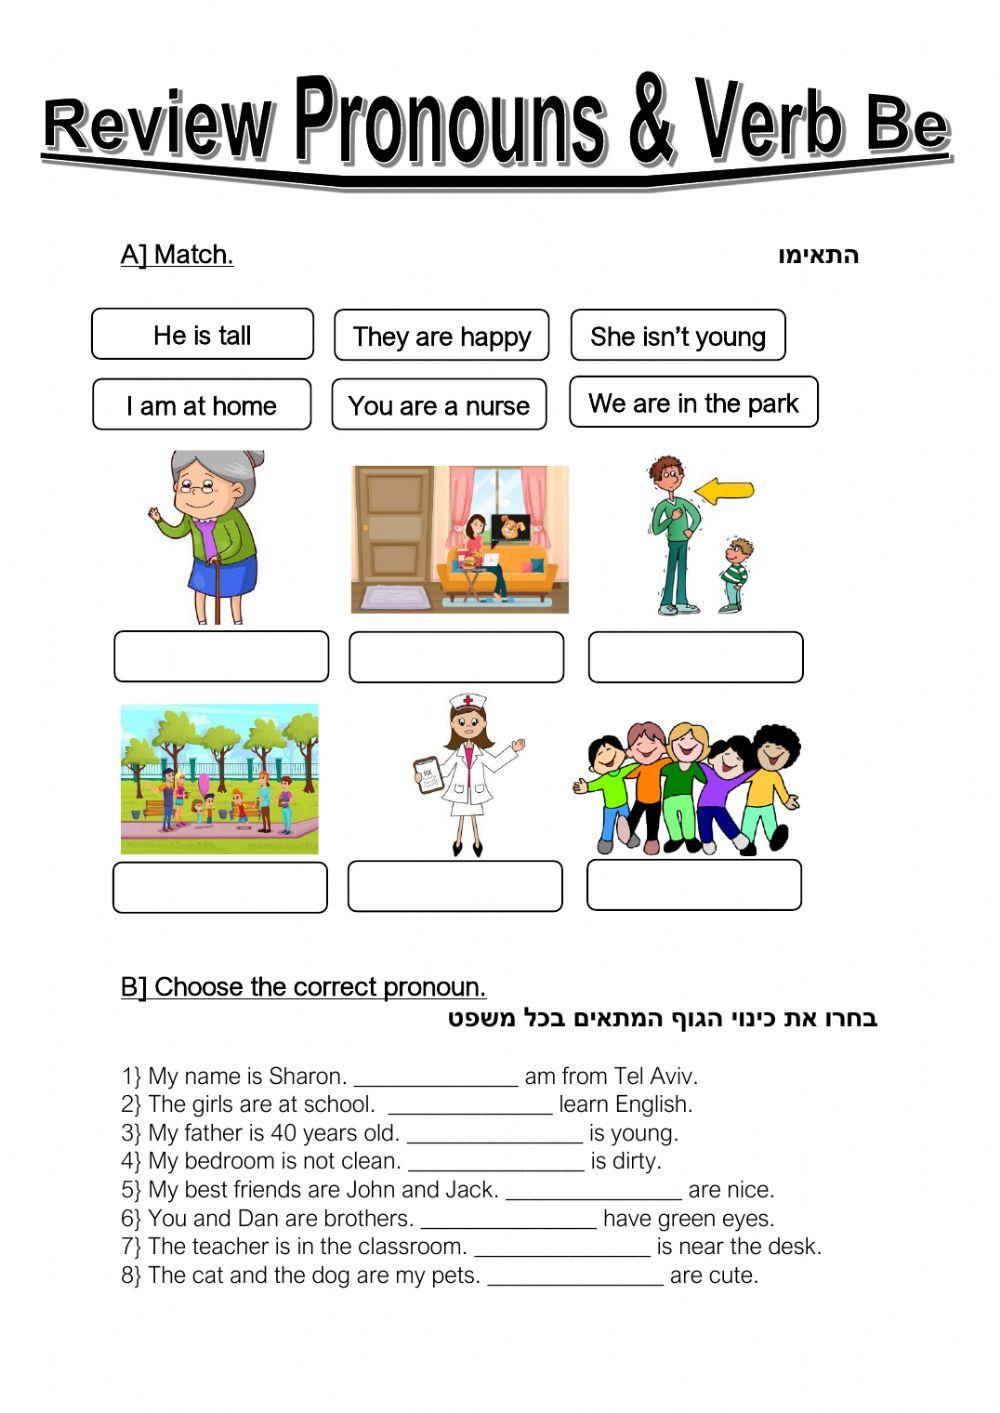 5th grade review pronouns and verb be